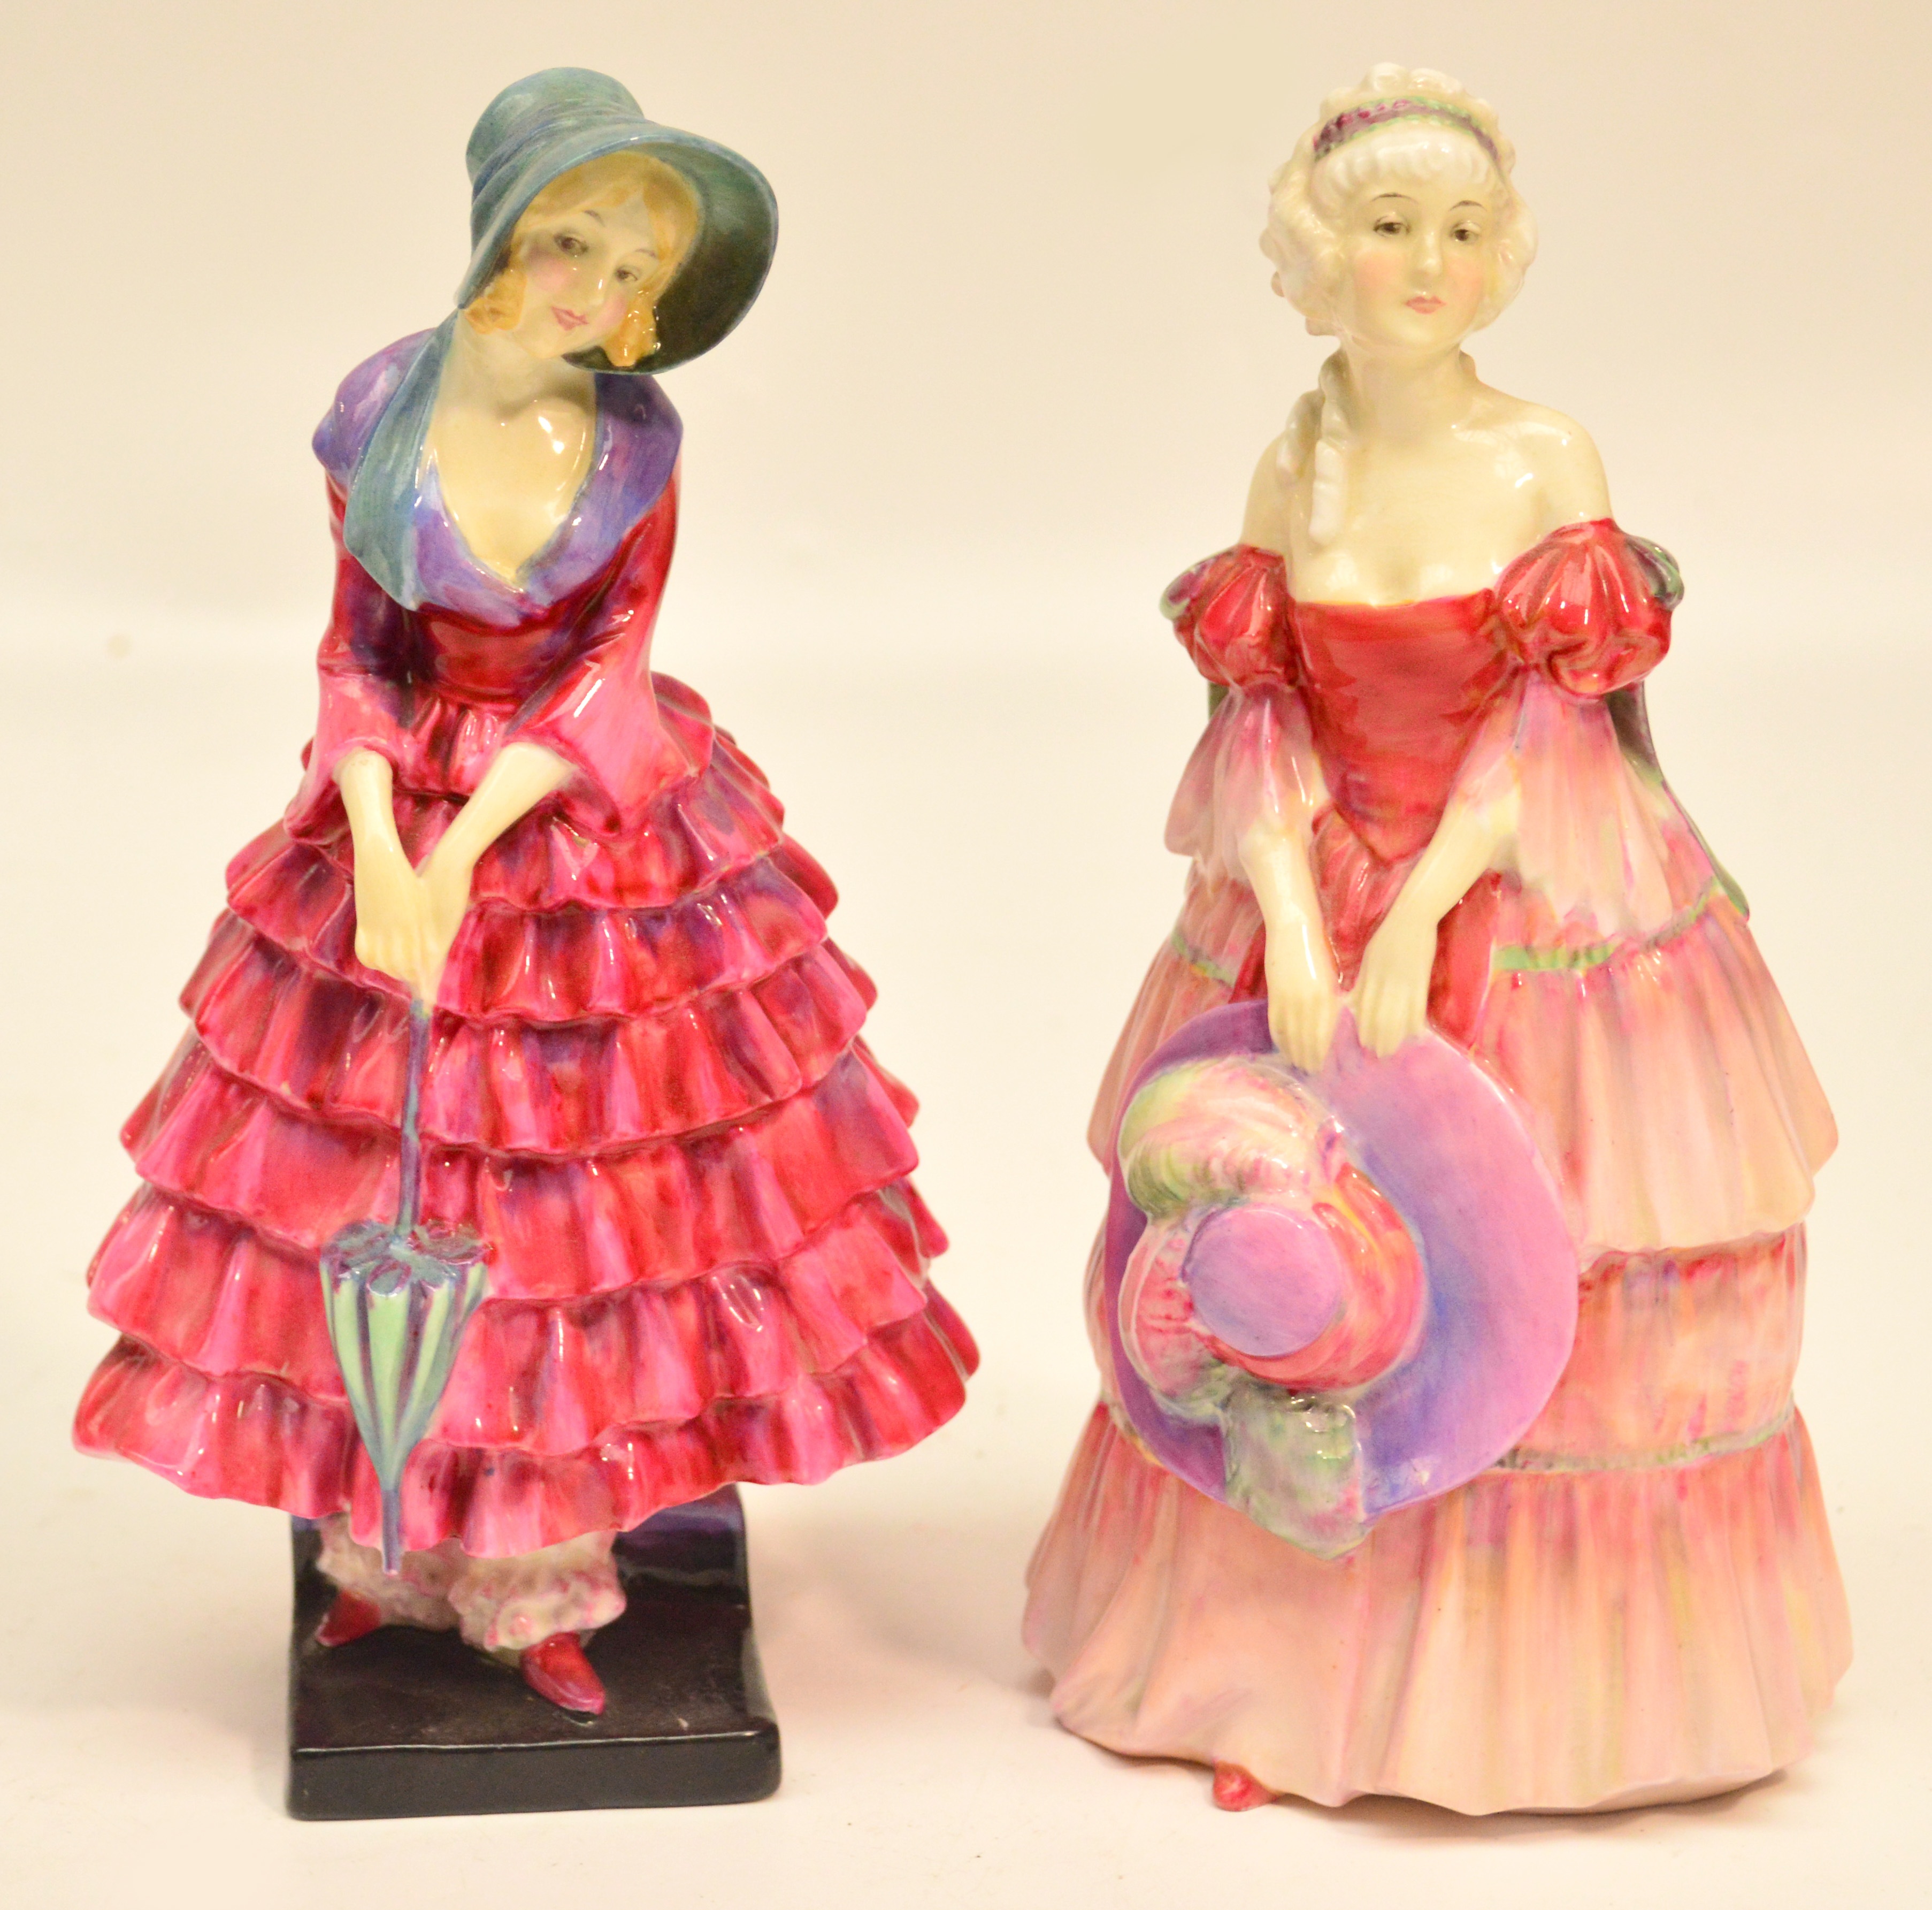 Two Royal Doulton figurines HN1517 "Veronica" and HN1340 "Priscilla" (af). CONDITION REPORT: